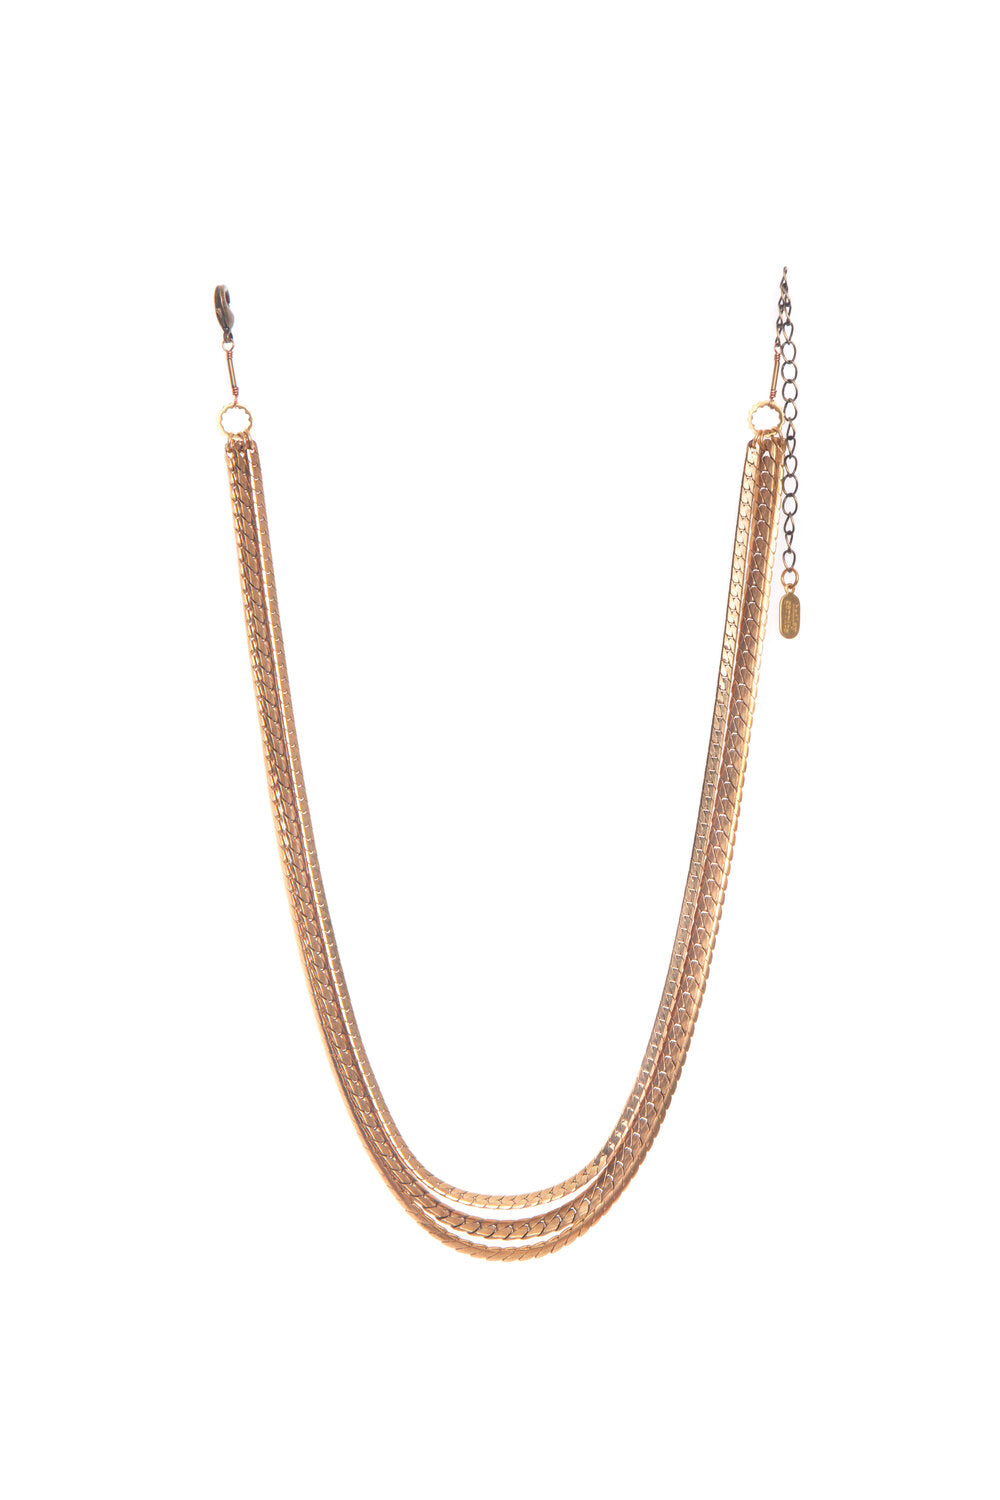 ACROPOLIS LARGE MIXED CHAIN NECKLACE - HAILEY GERRITS